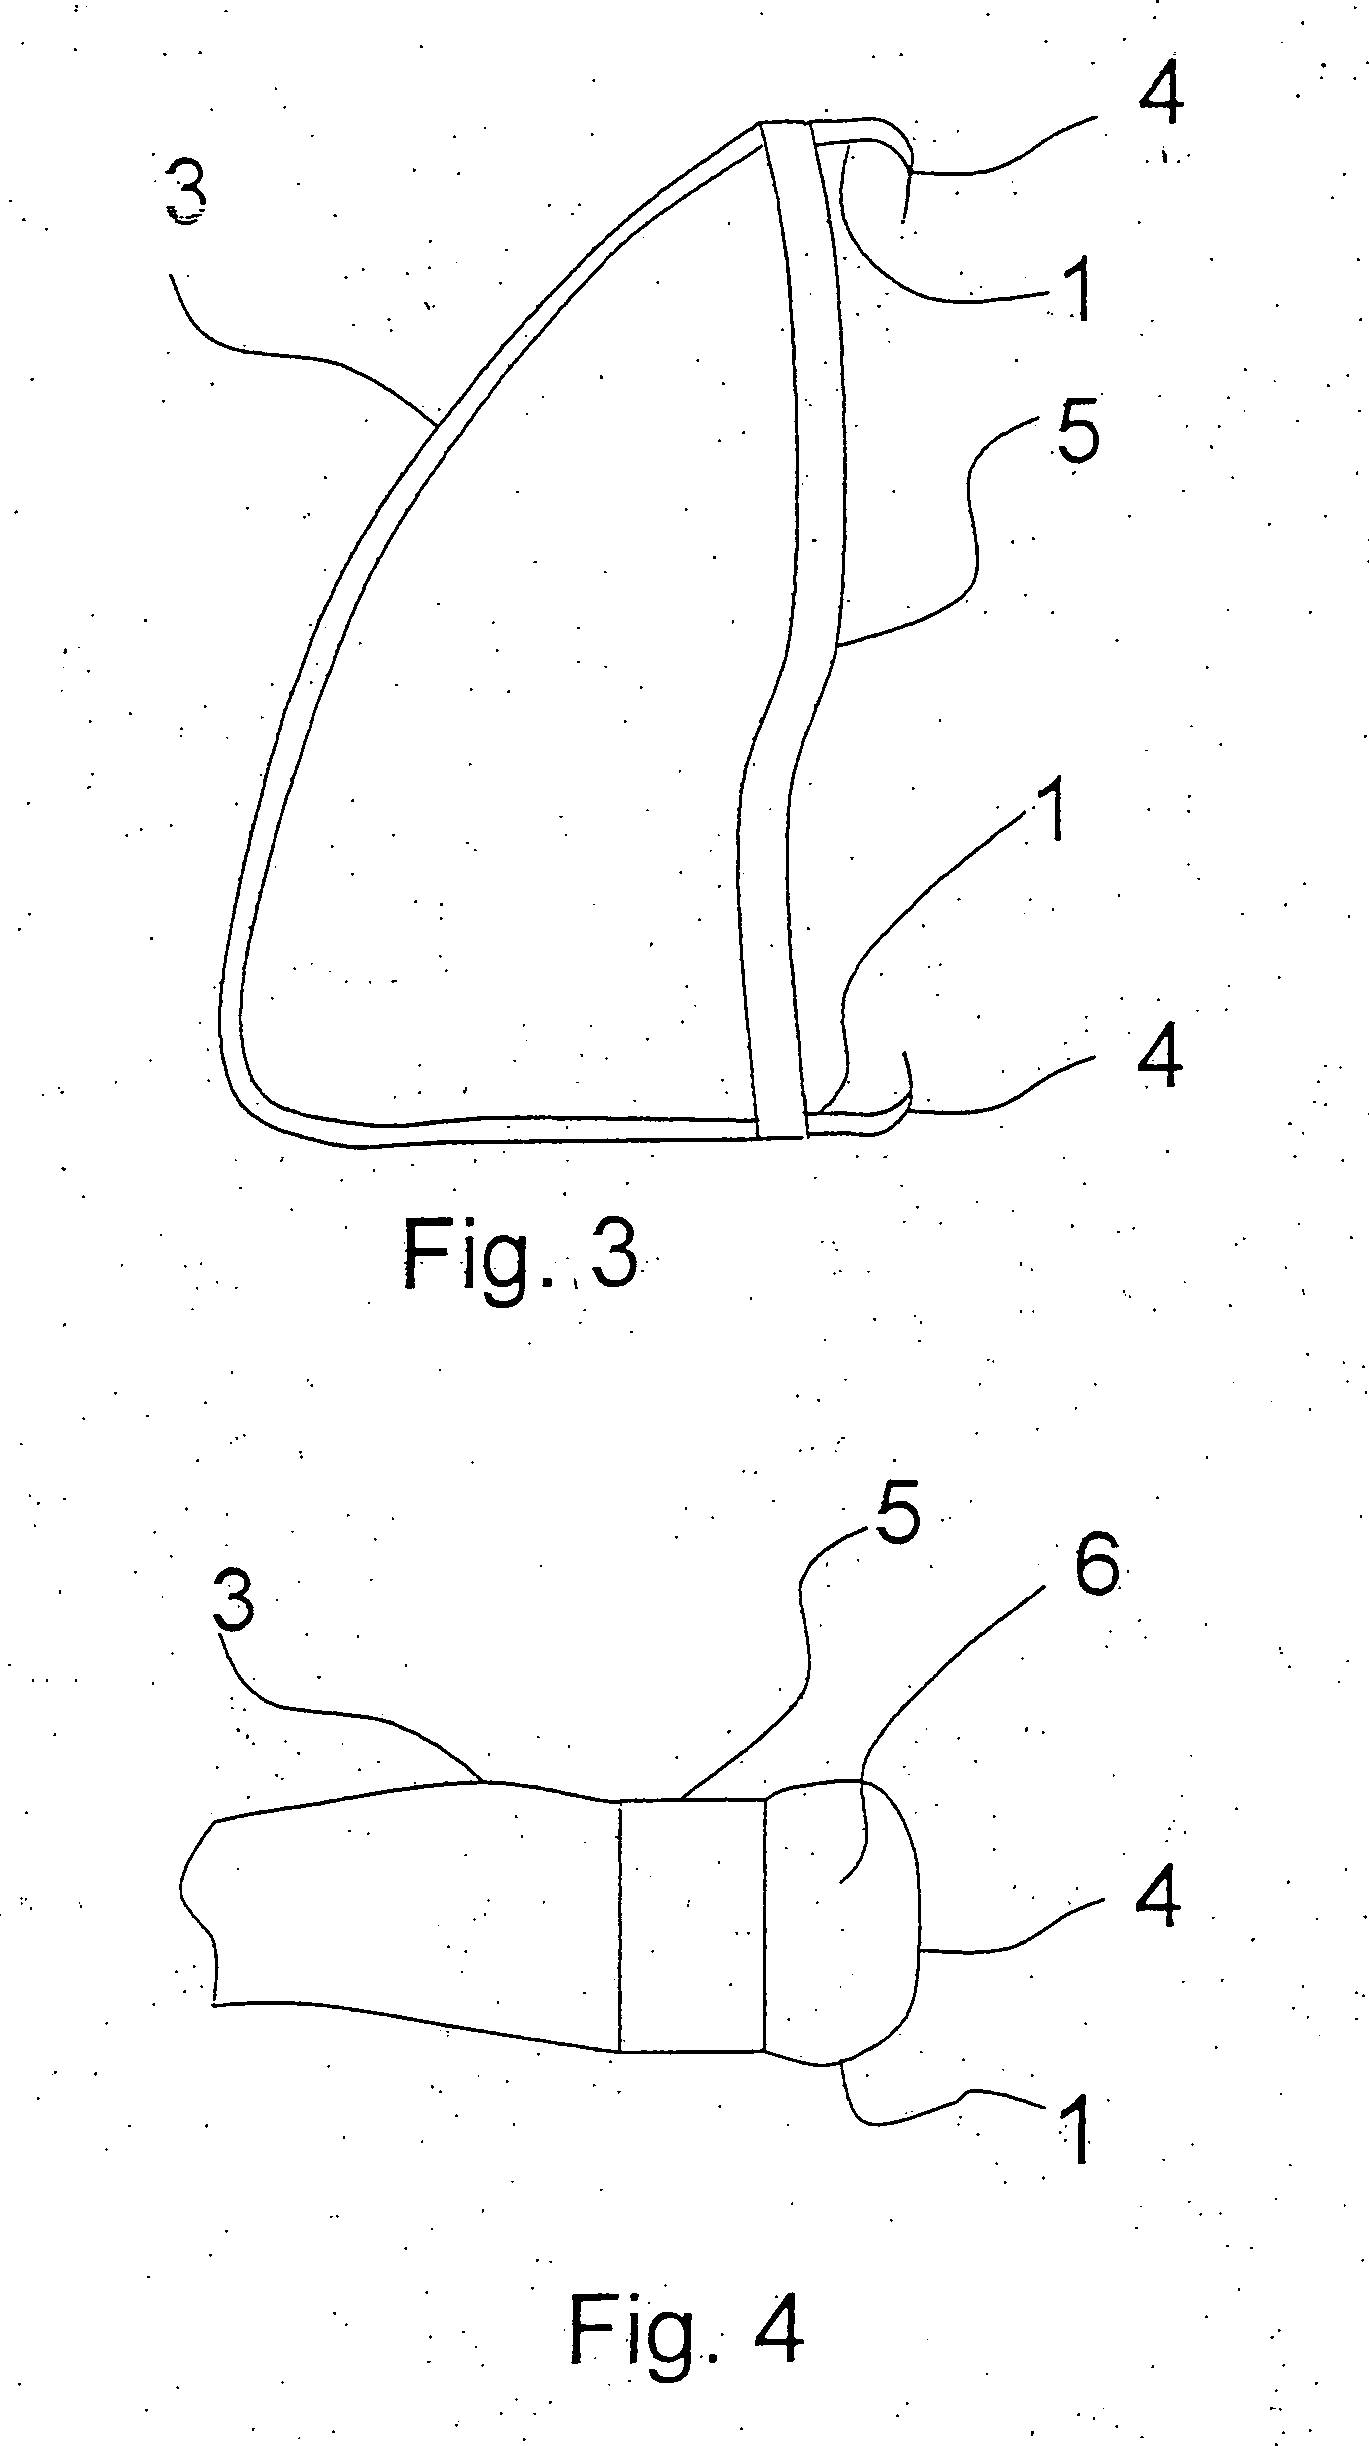 Breathing mask with an adhesive seal